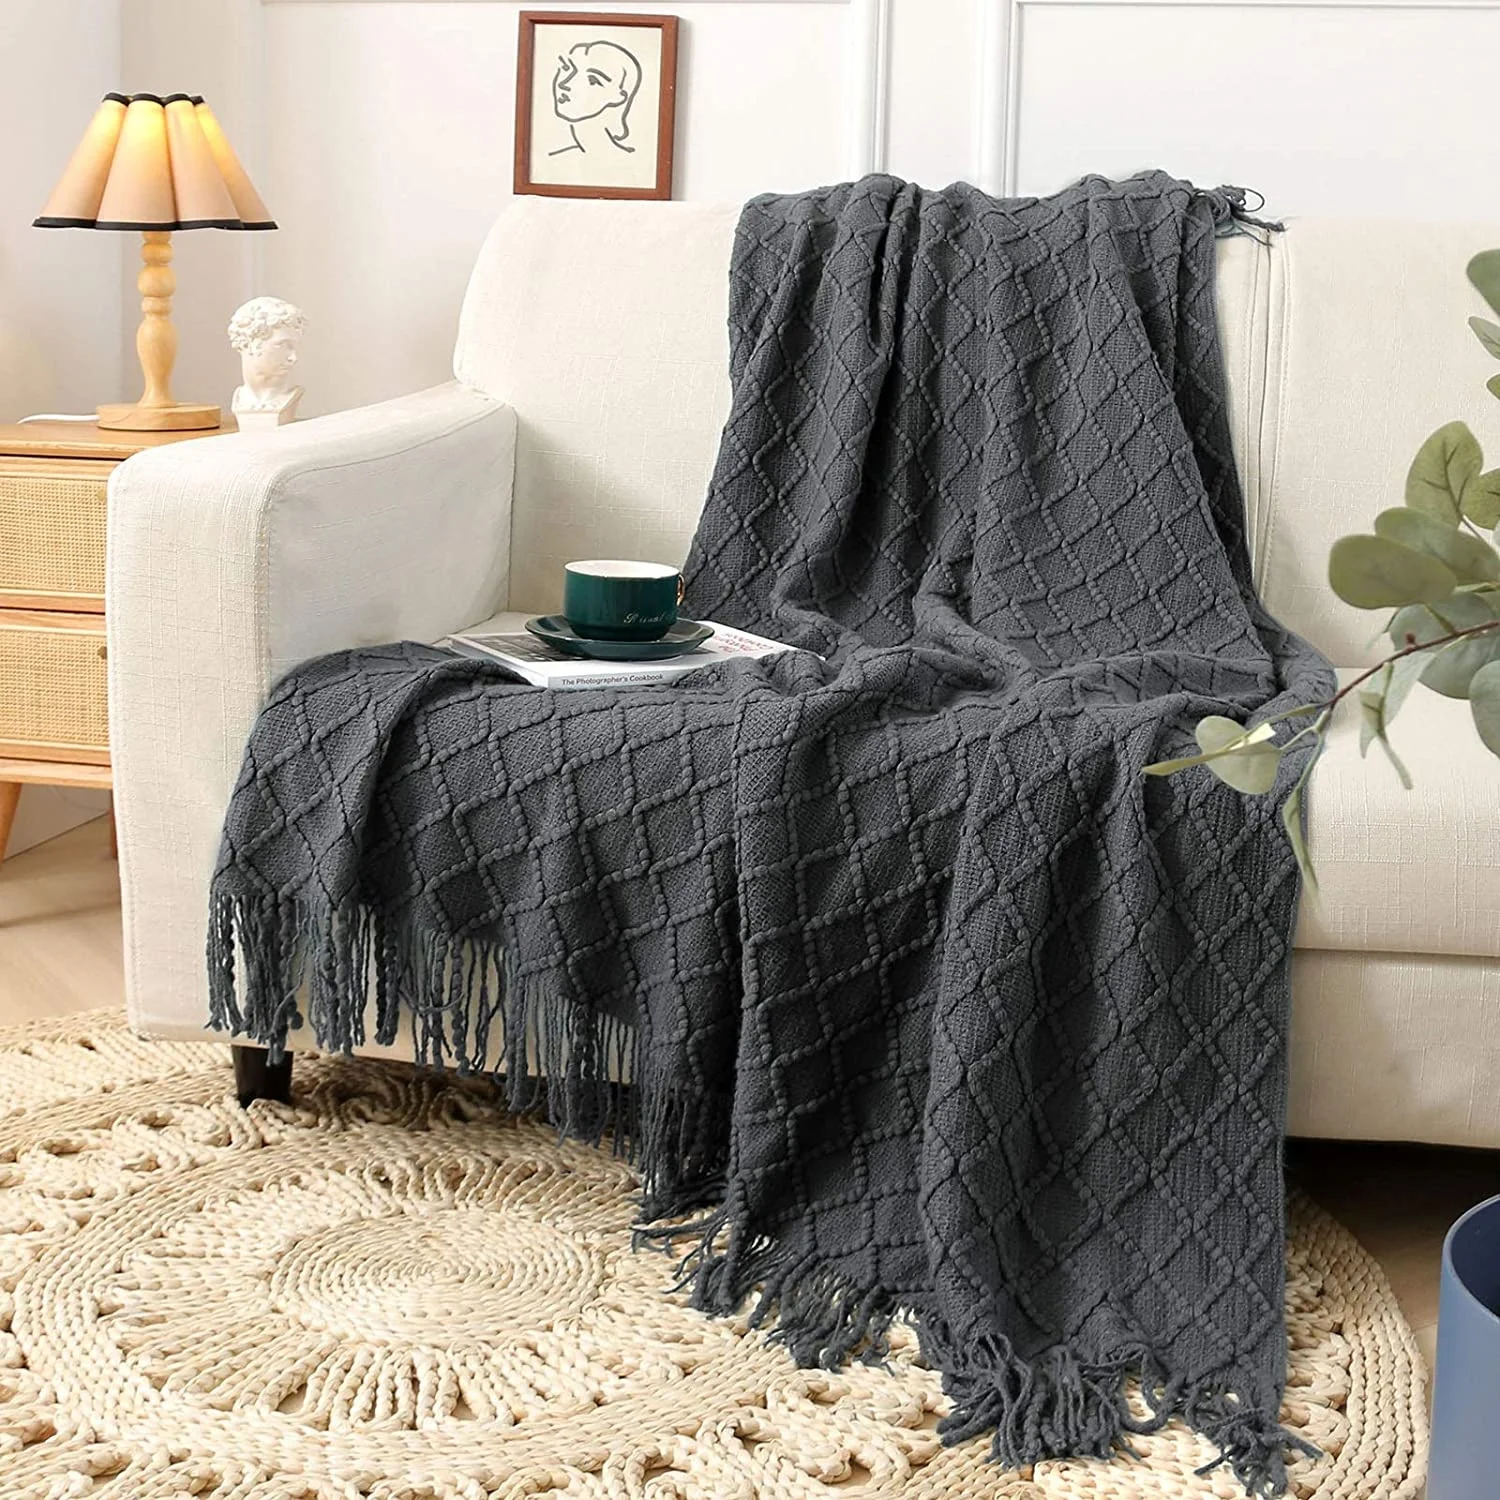 Hot Sale Knitted Blanket Lightweight Decorative Throw With Tassels For Couch Bed Sofa Travel